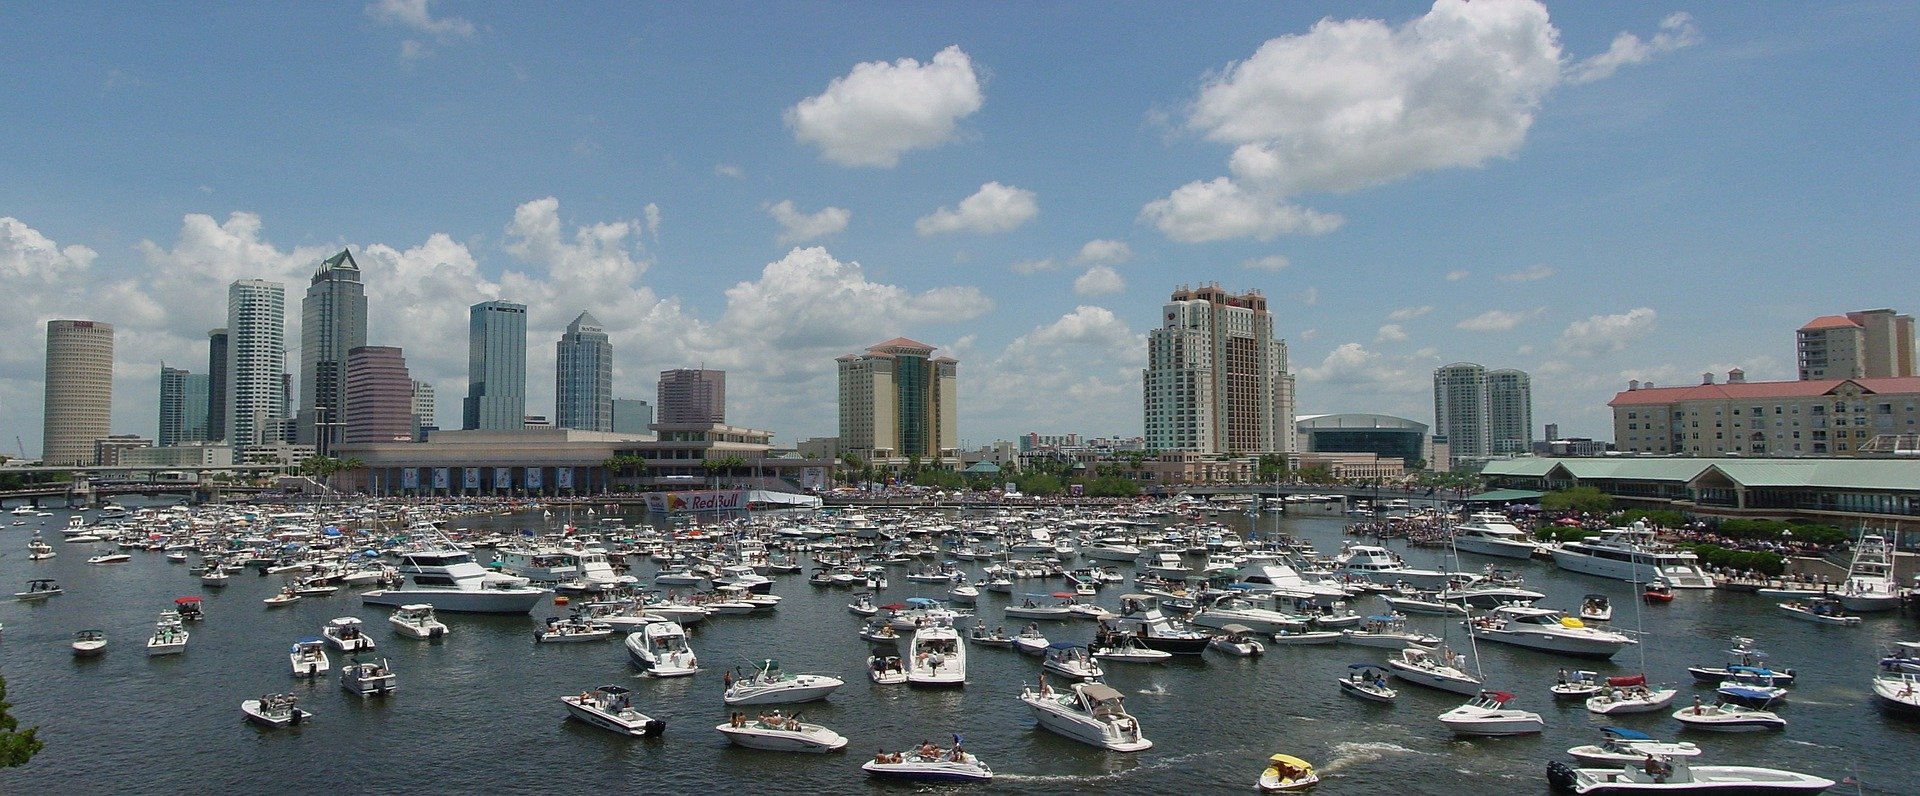 Busy Harbor in Tampa